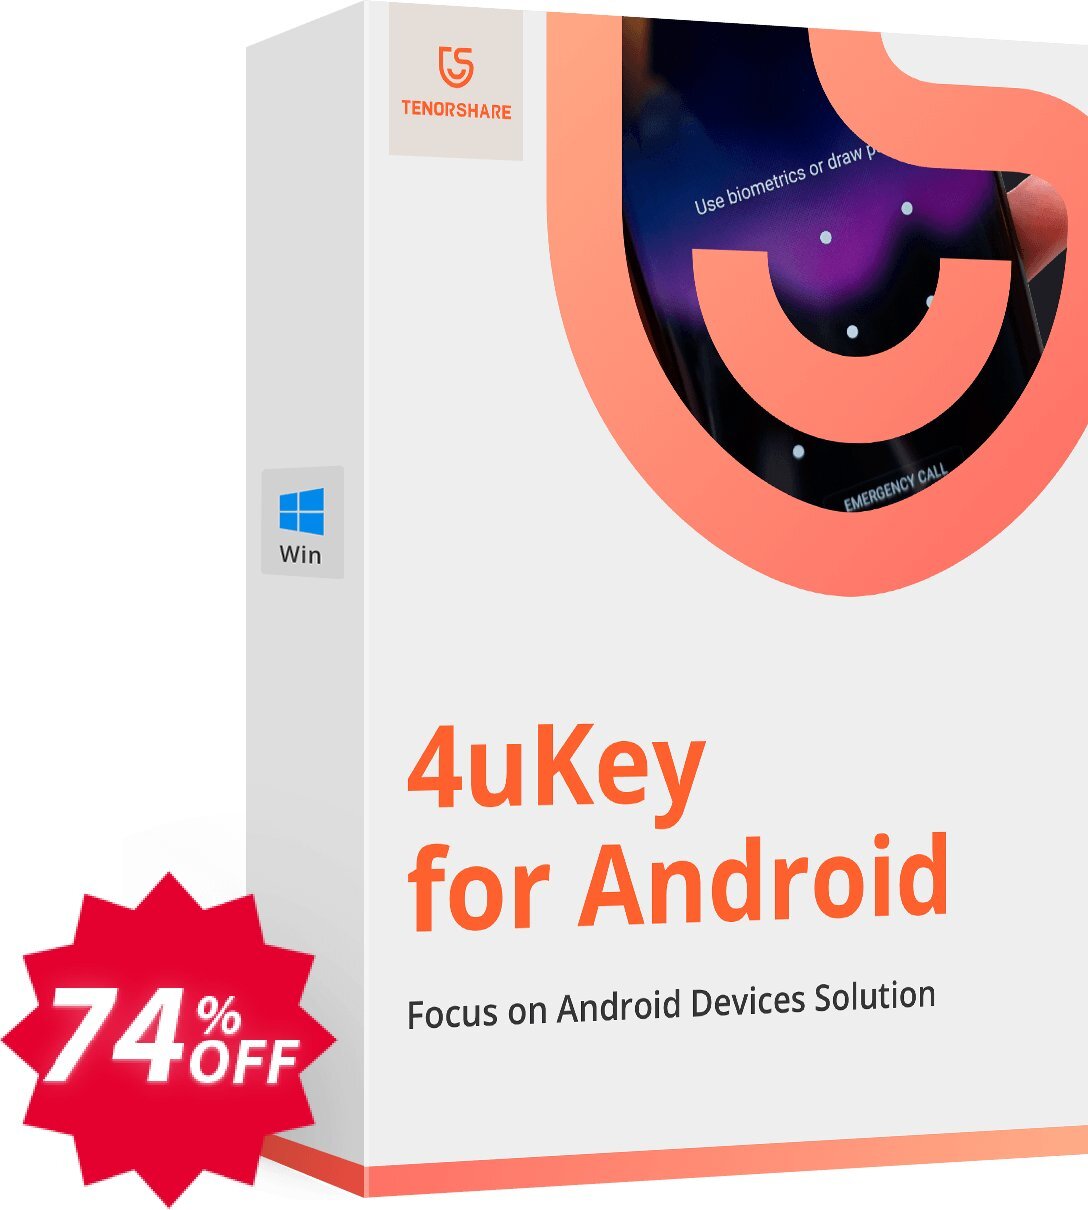 Tenorshare 4uKey for Android, Lifetime Plan  Coupon code 74% discount 